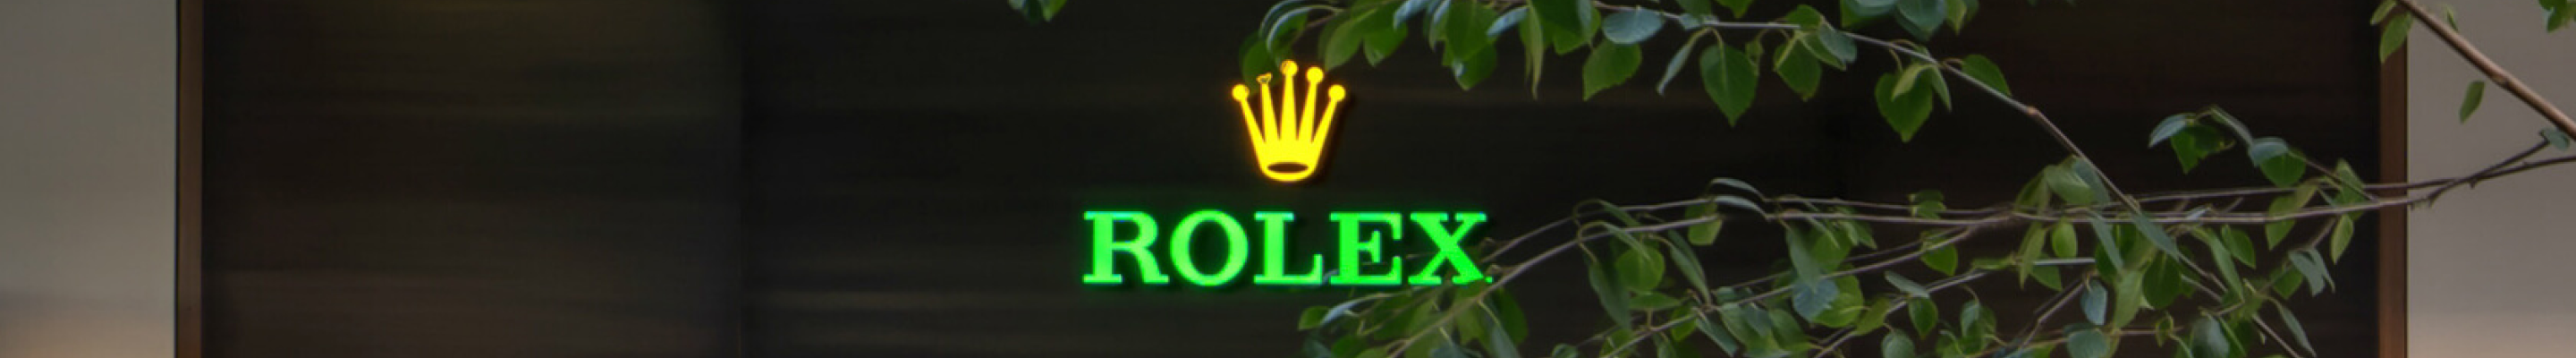 Rolex Storefront at Heller Jewelers in California